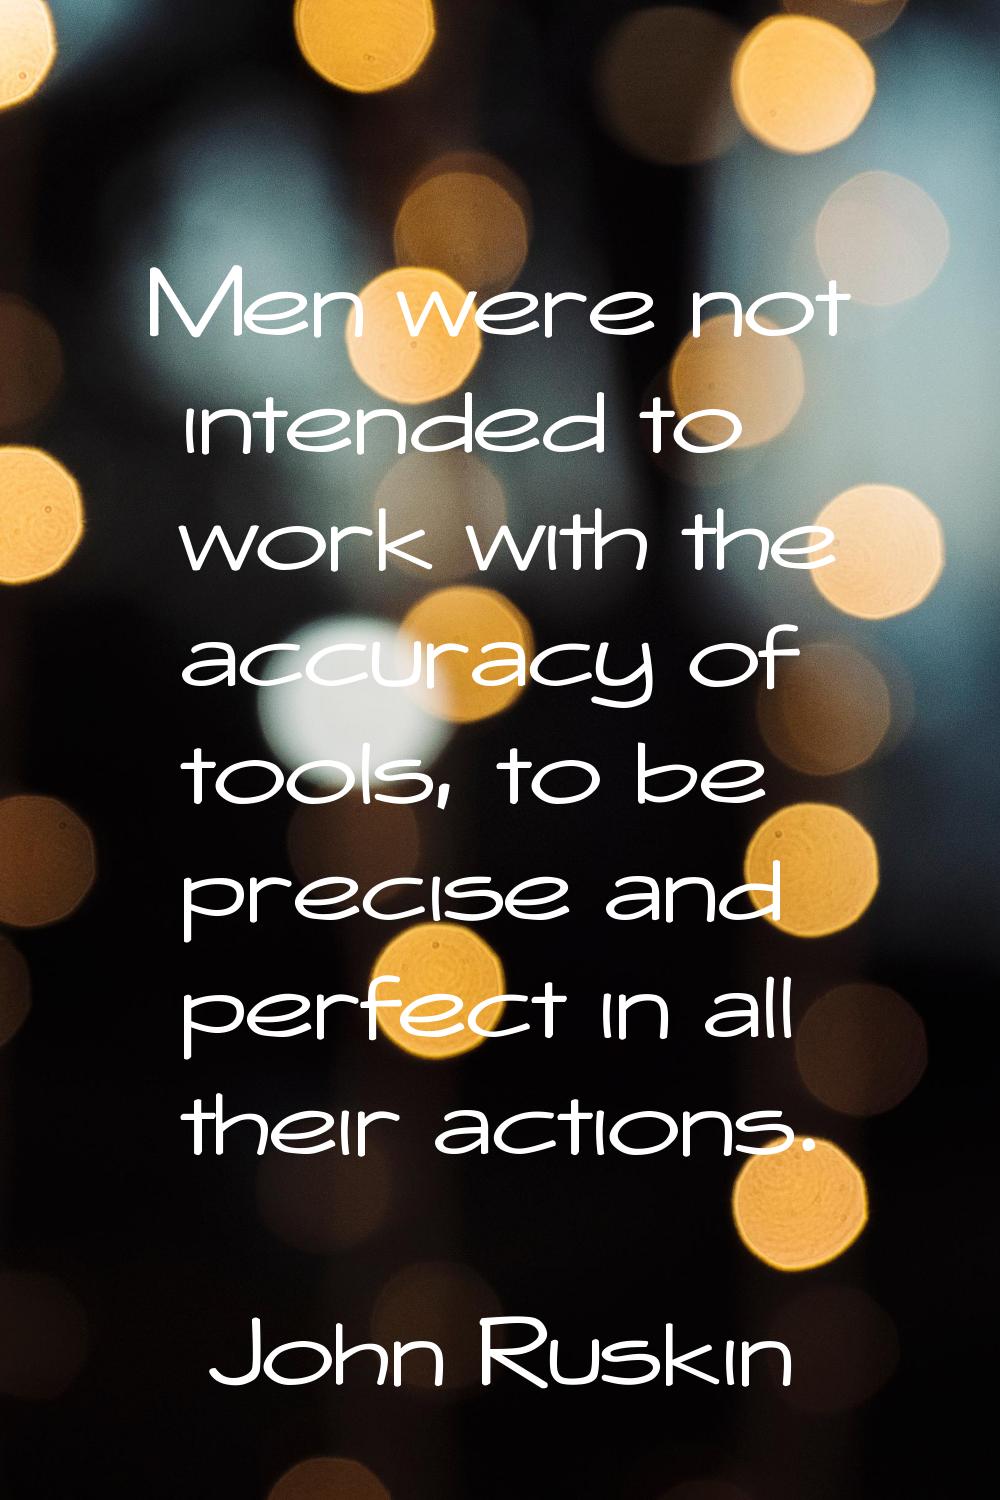 Men were not intended to work with the accuracy of tools, to be precise and perfect in all their ac